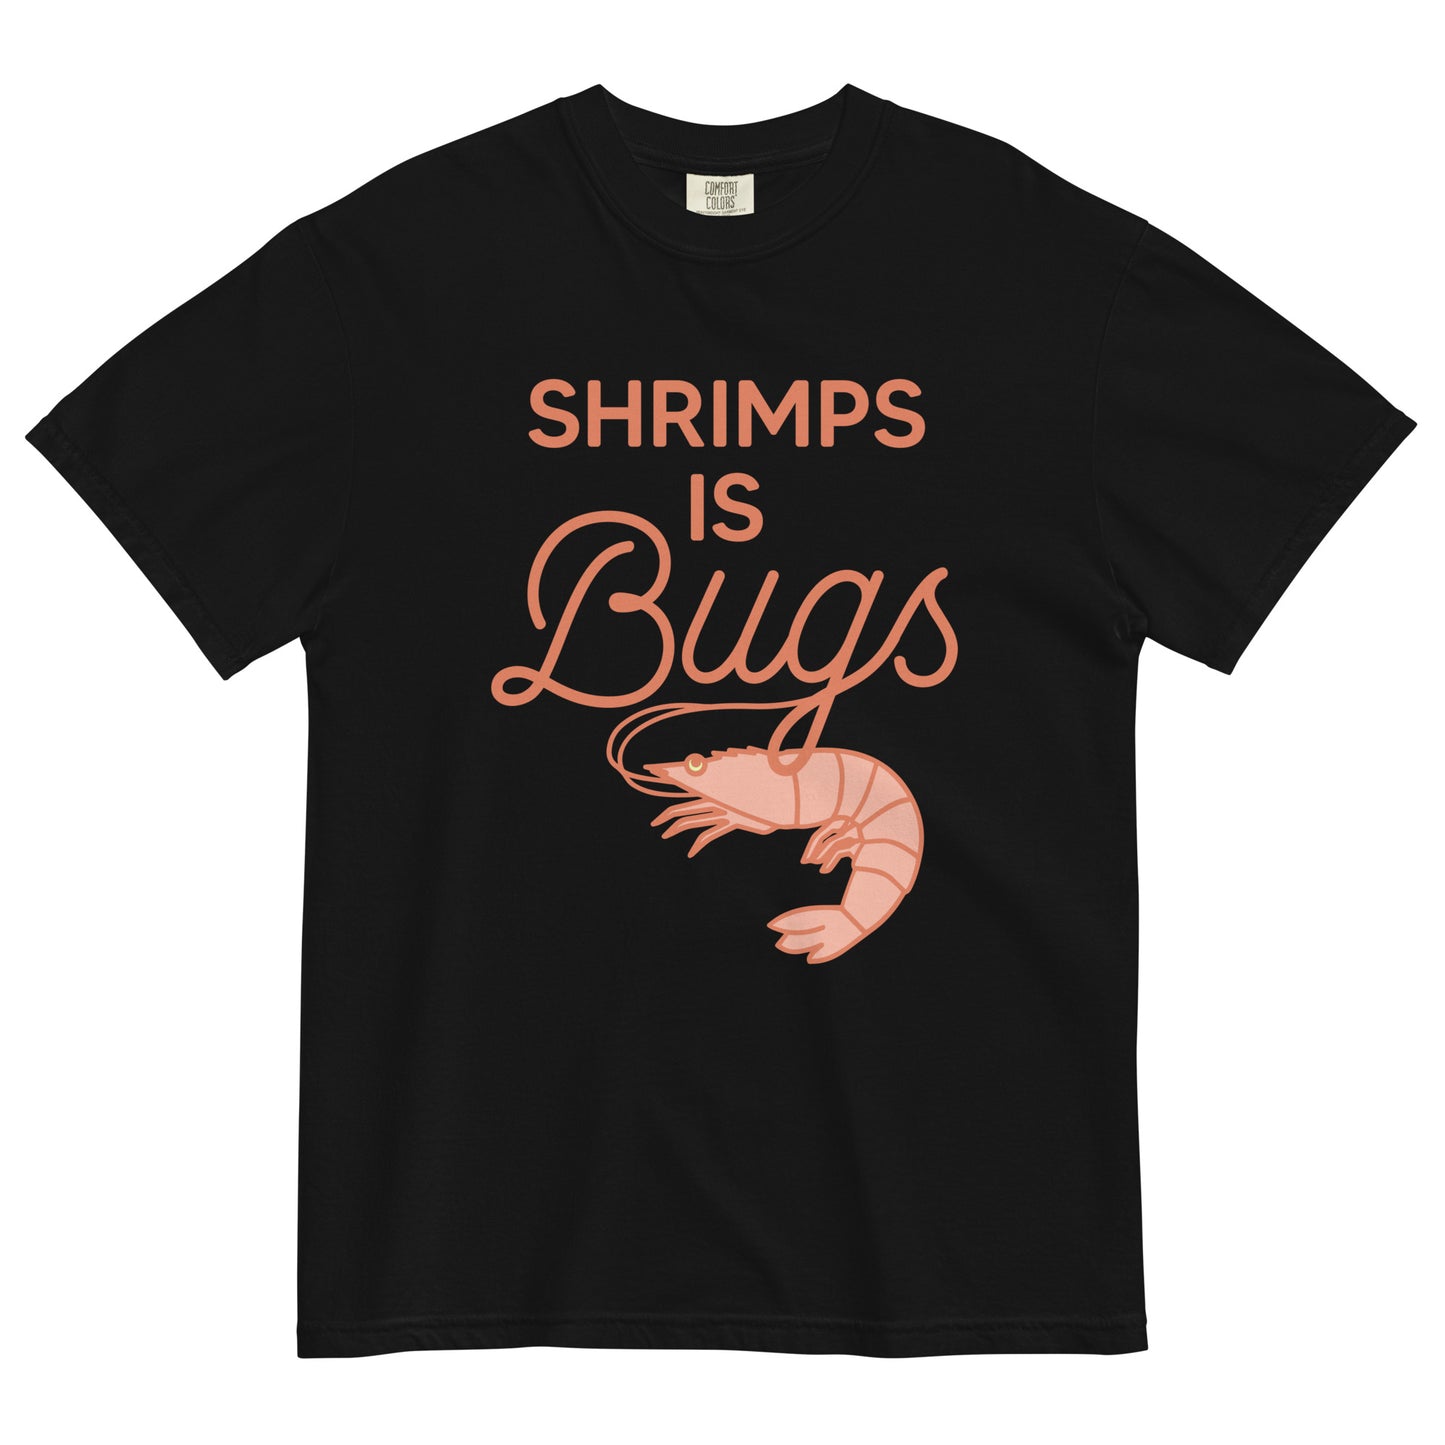 Shrimps Is Bugs Men's Relaxed Fit Tee